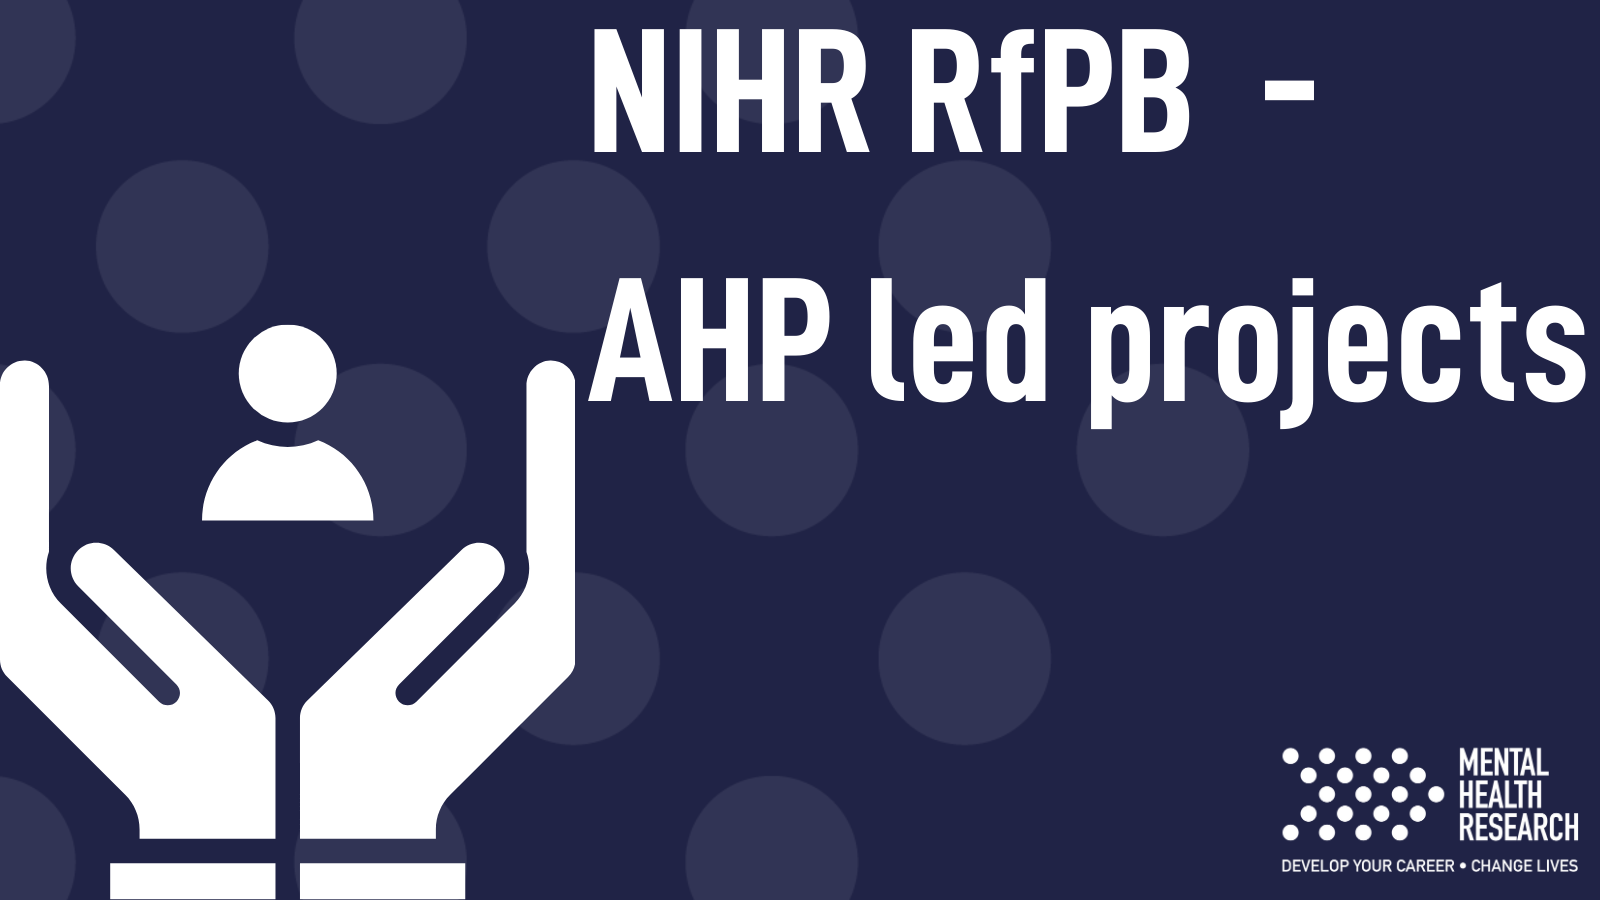 NIHR RfPB call for AHP led projects